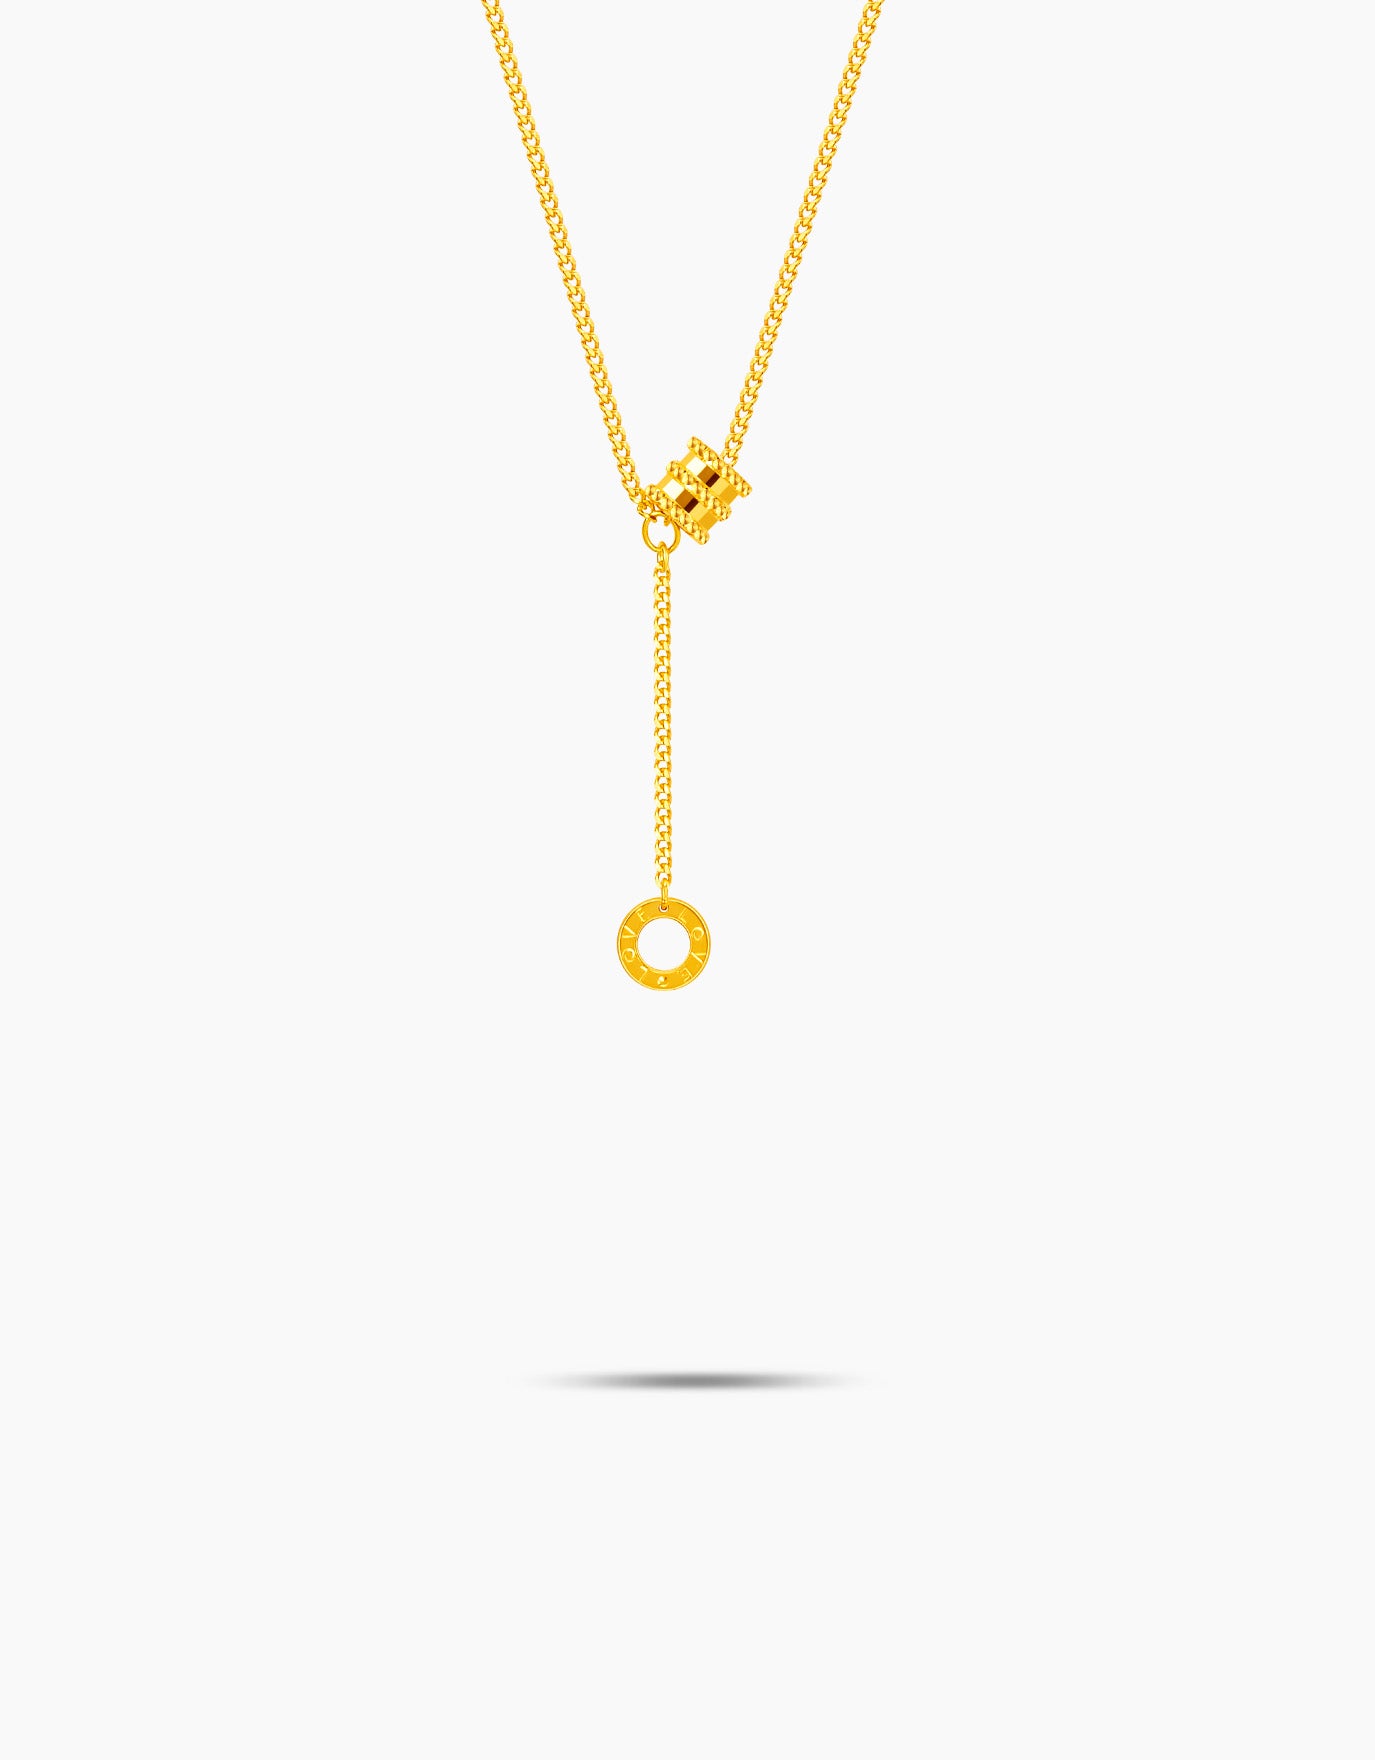 LVC 9IN Barrel in Love 999 Gold Necklace